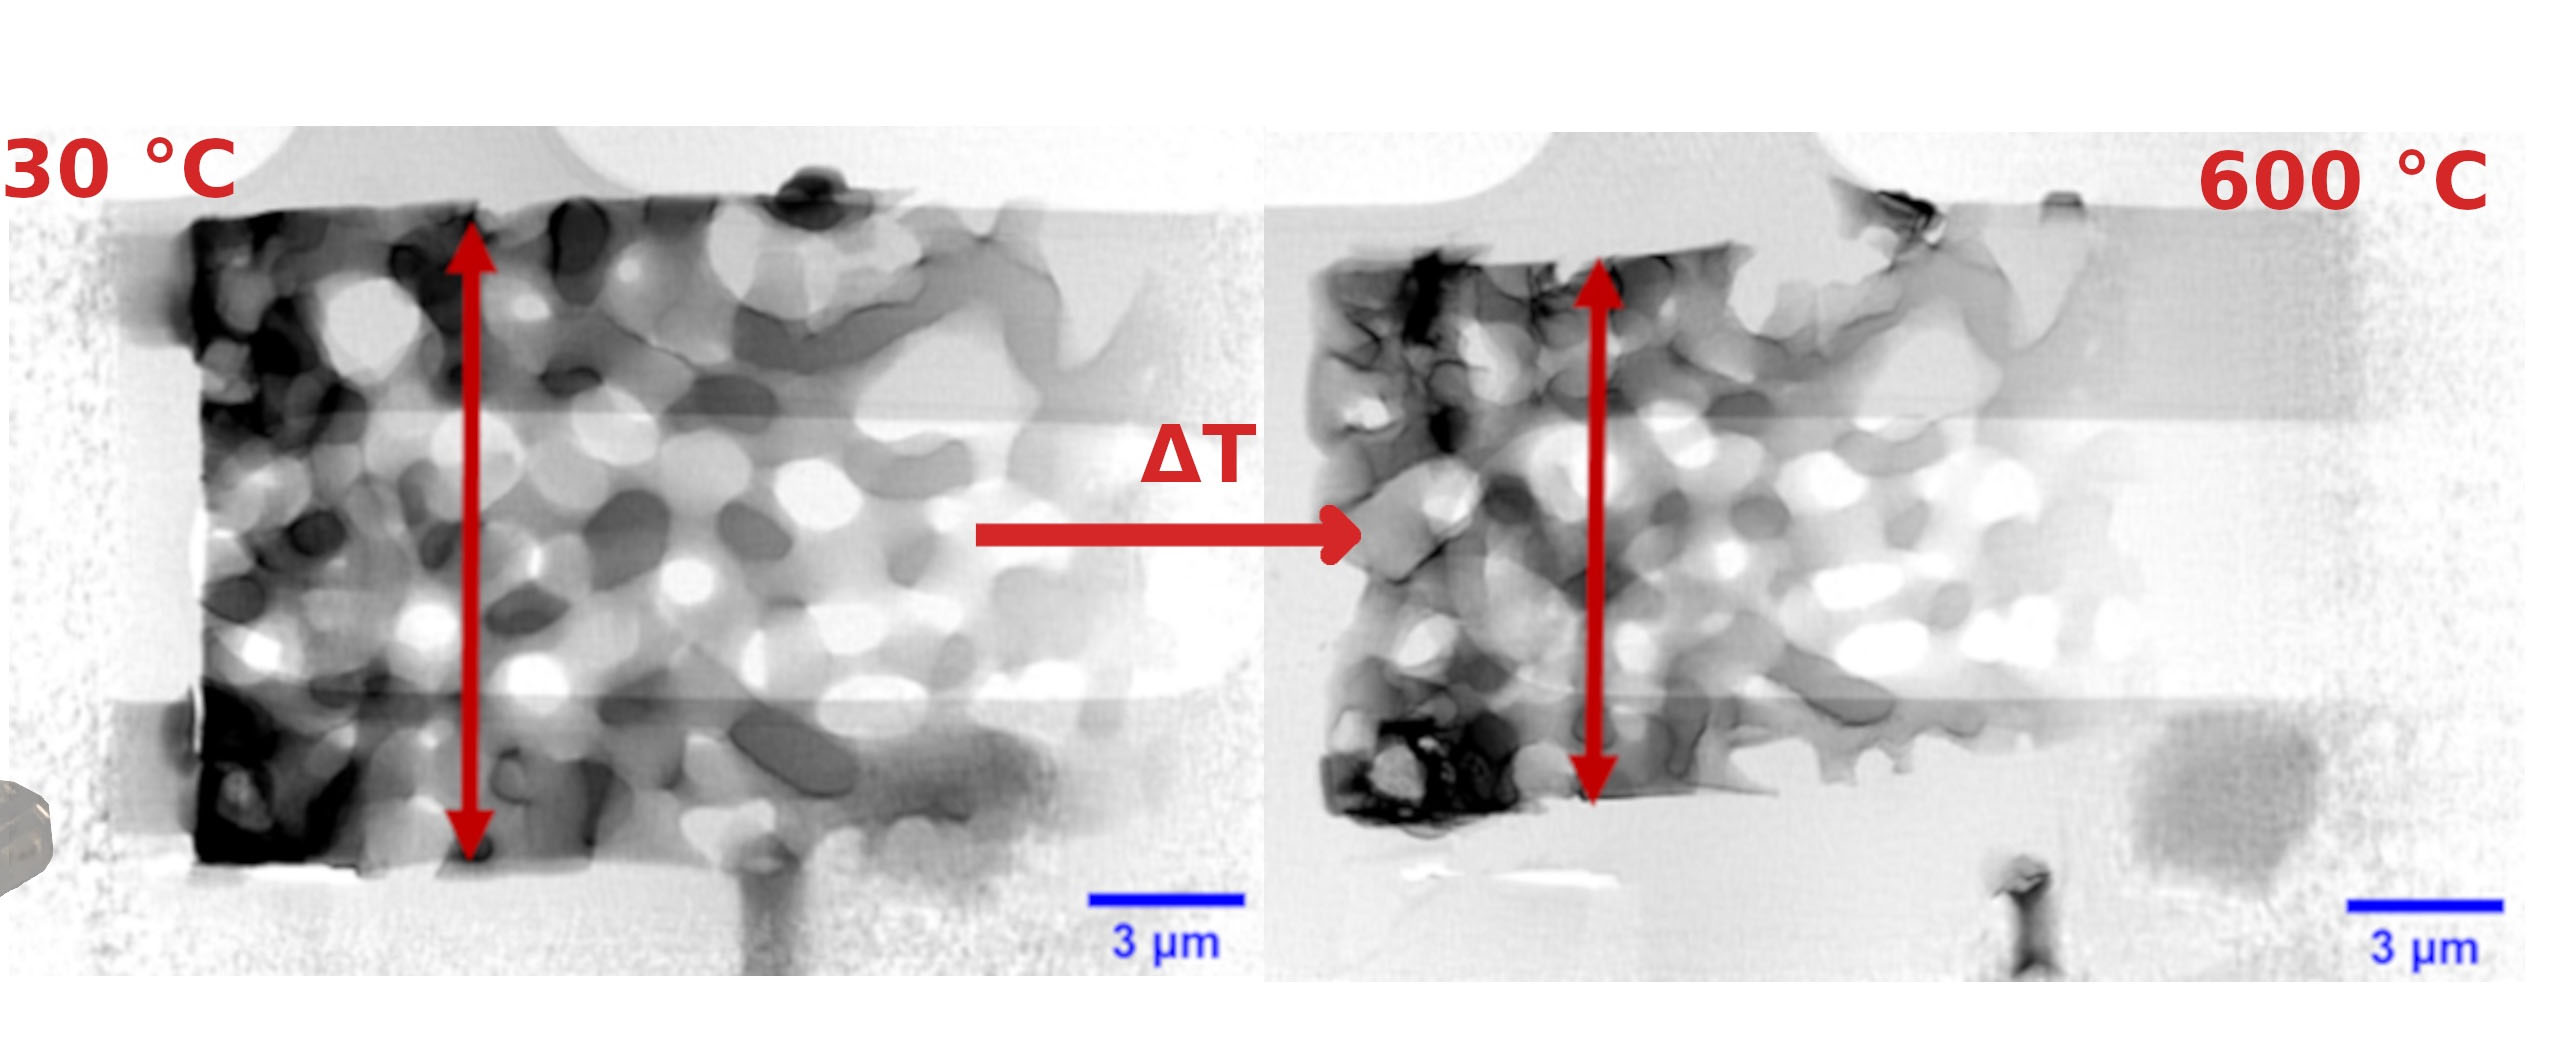 2D X-ray nanomicroscopy allows to follow changes of the catalyst during heating and under controlled gas conditions